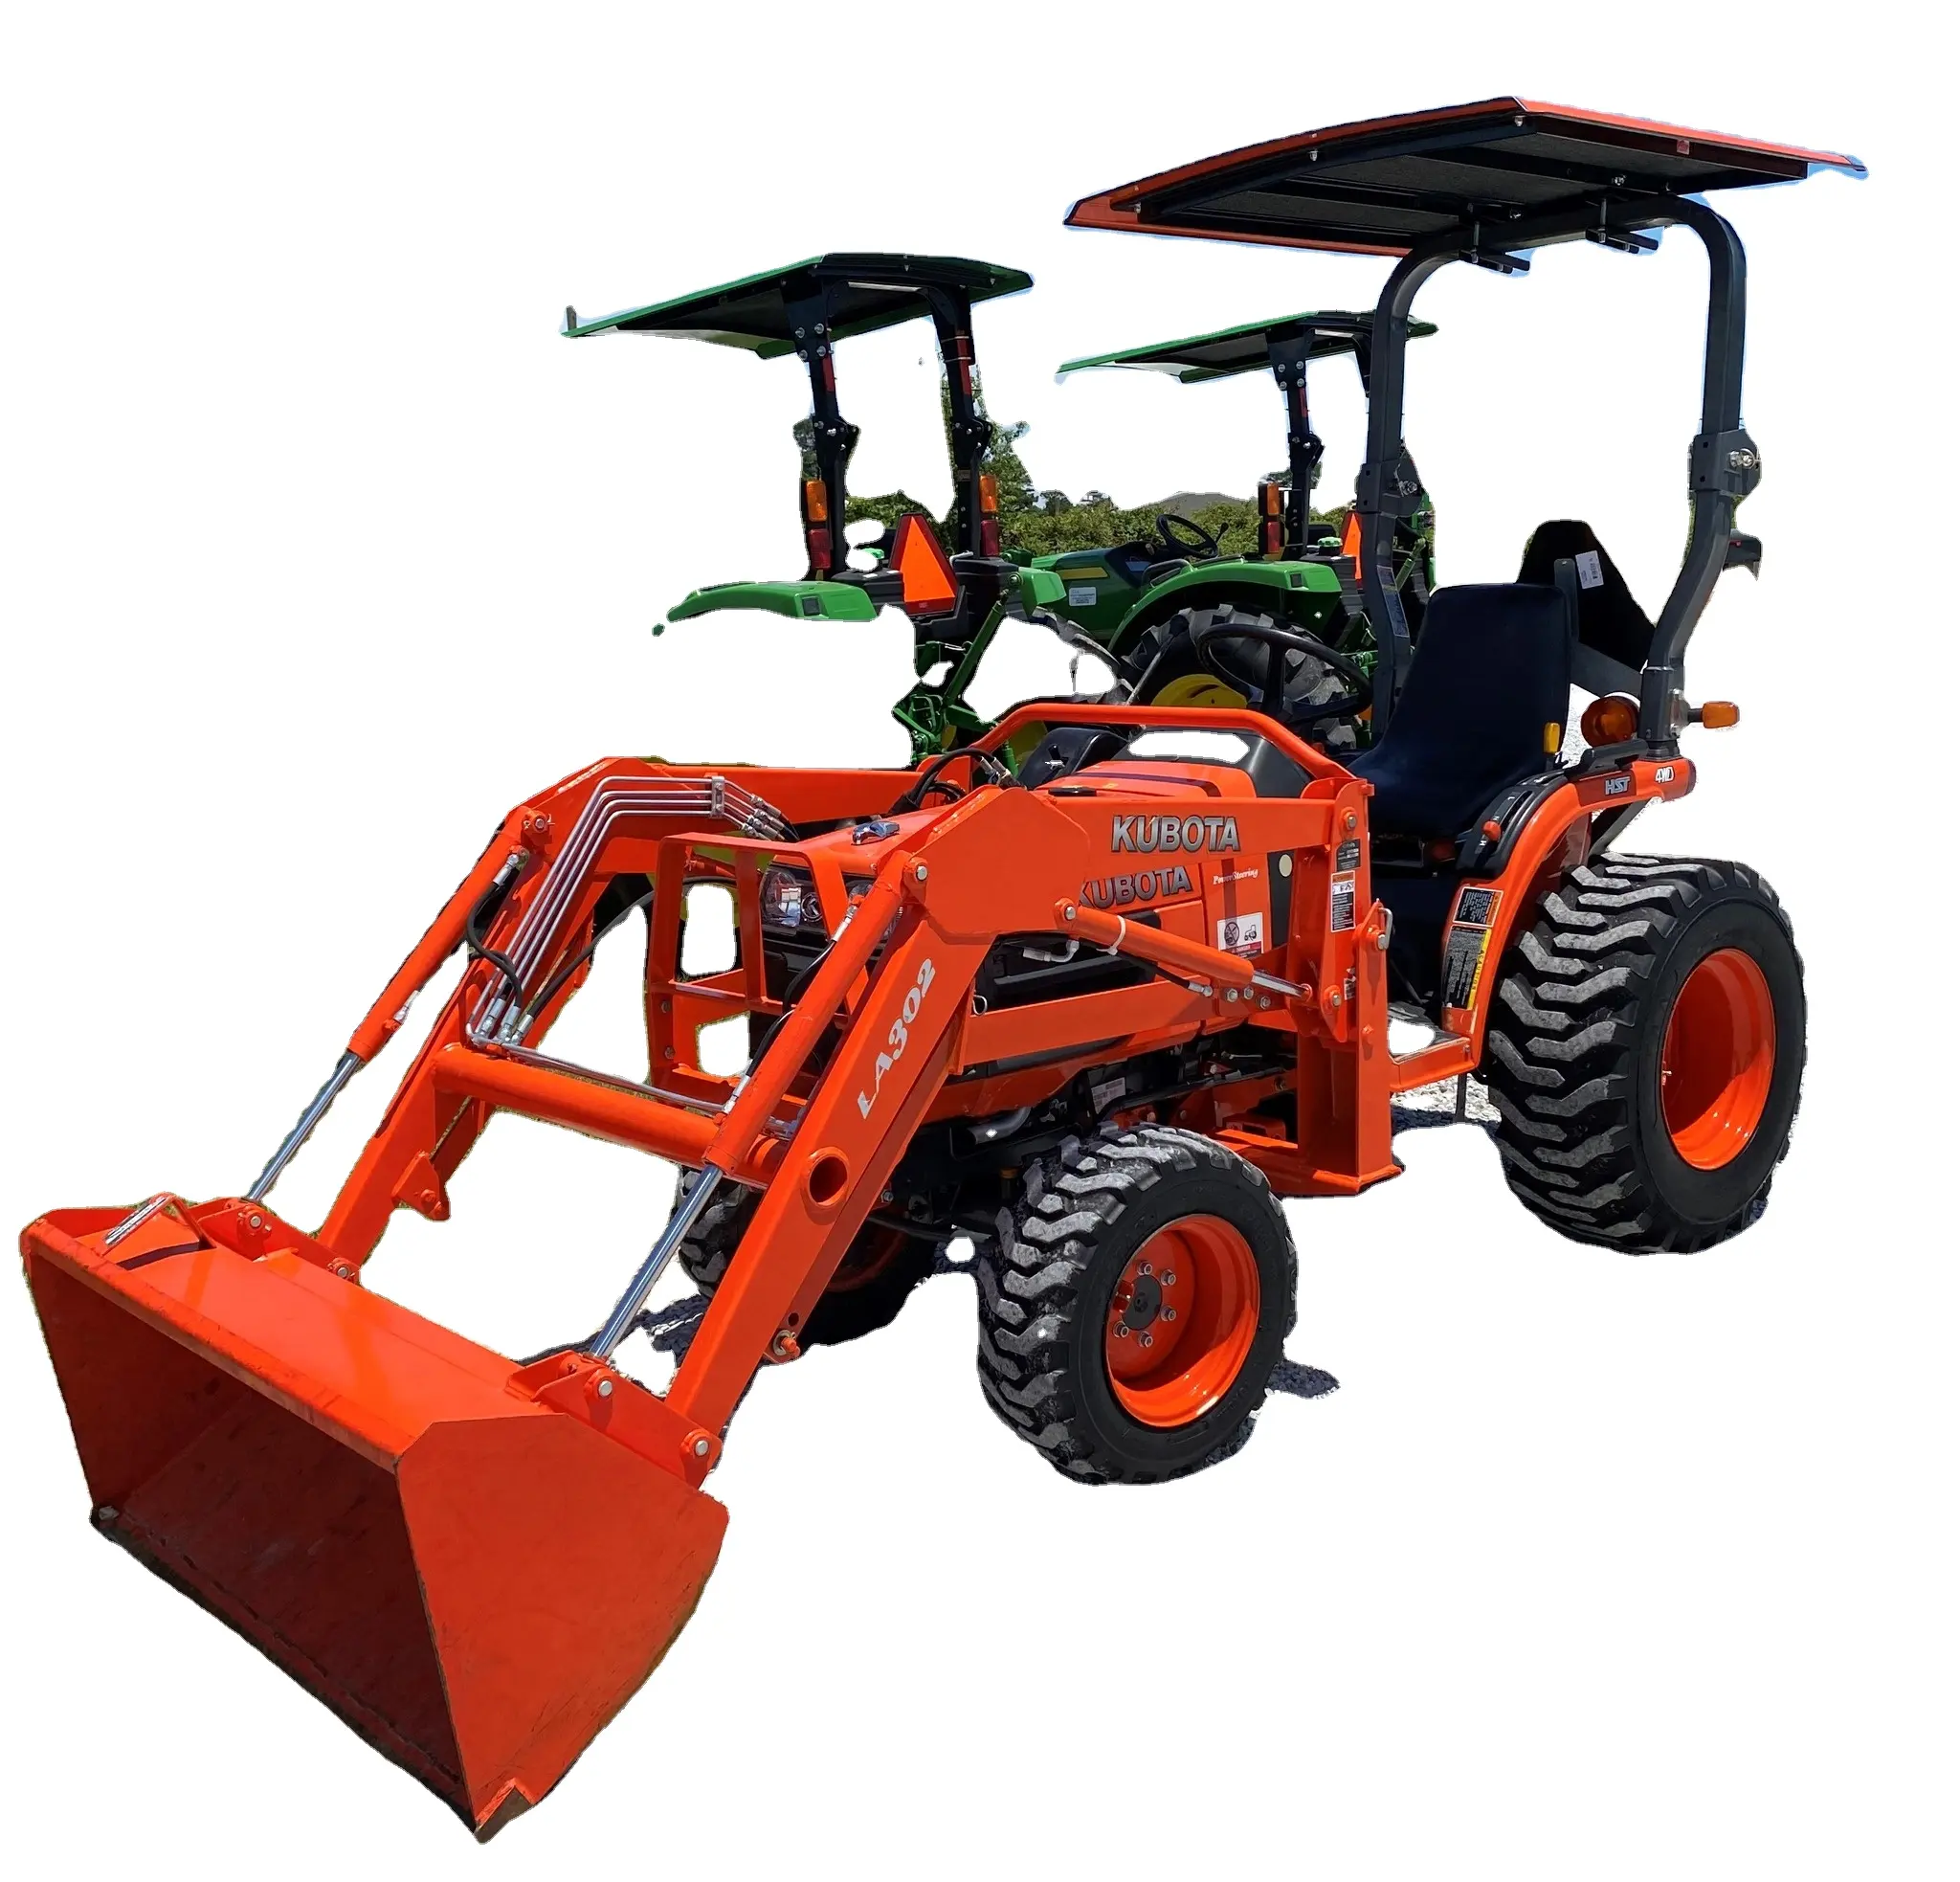 QUALITY KUBOTA 4WD FARM TRACTOR L4018 AT VERY CHEAP PRICES mini tractor kubota 50 55 60 70 75 80 hp available